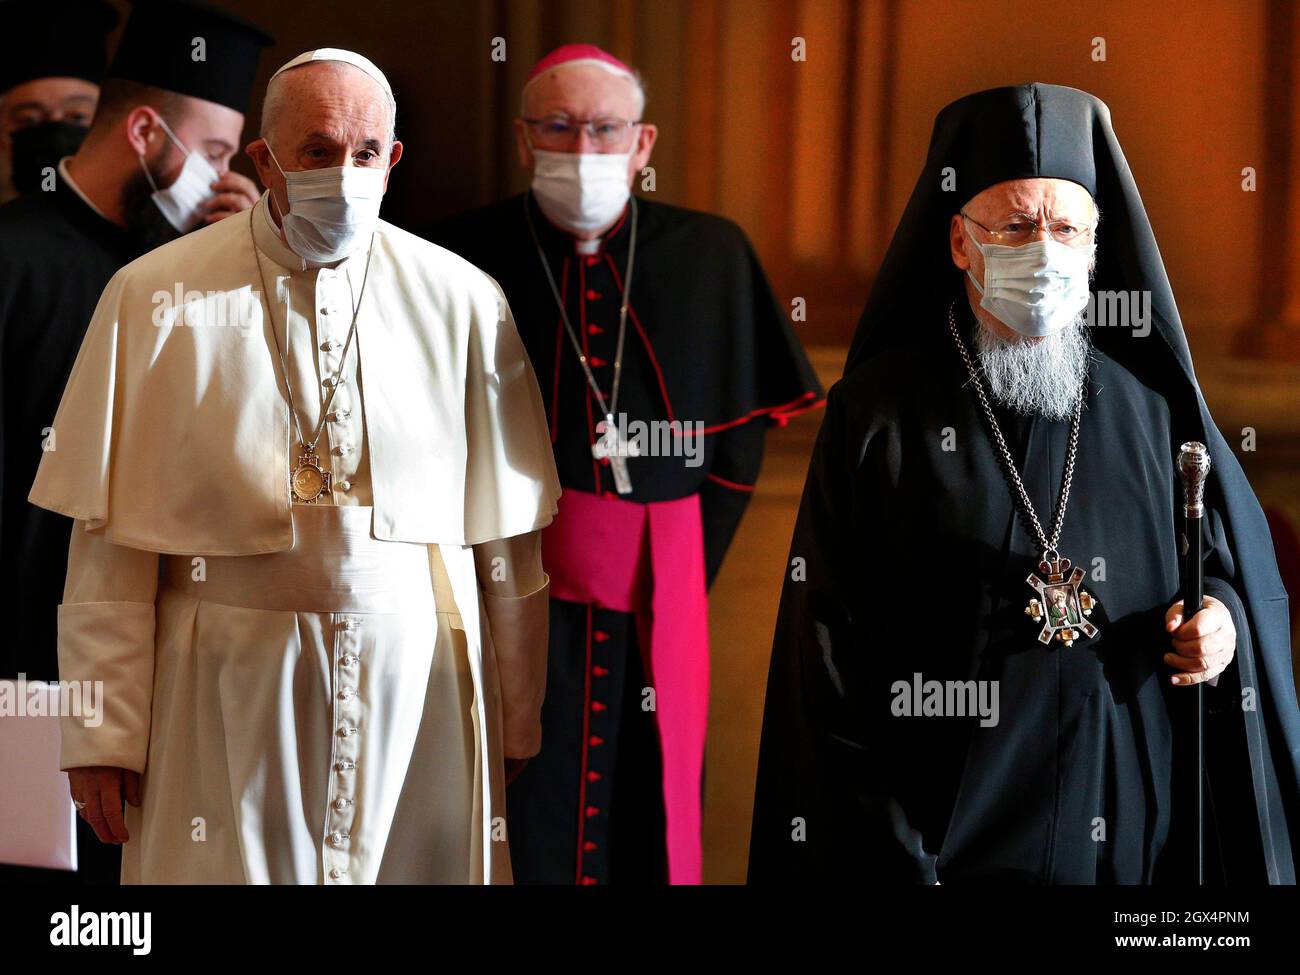 Vatican. 04th Oct, 2021. Pope Francis and Orthodox Patriarch Bartholomew of Constantinople arrive for the meeting, Faith and Science: Towards COP26, with religious leaders in the Apostolic Palace at the Vatican Oct. 4, 2021. The meeting was part of the run-up to the U.N. Climate Change Conference, called COP26, in Glasgow, Scotland, Oct. 31 to Nov. 12, 2021. Credit: dpa picture alliance/Alamy Live News Stock Photo